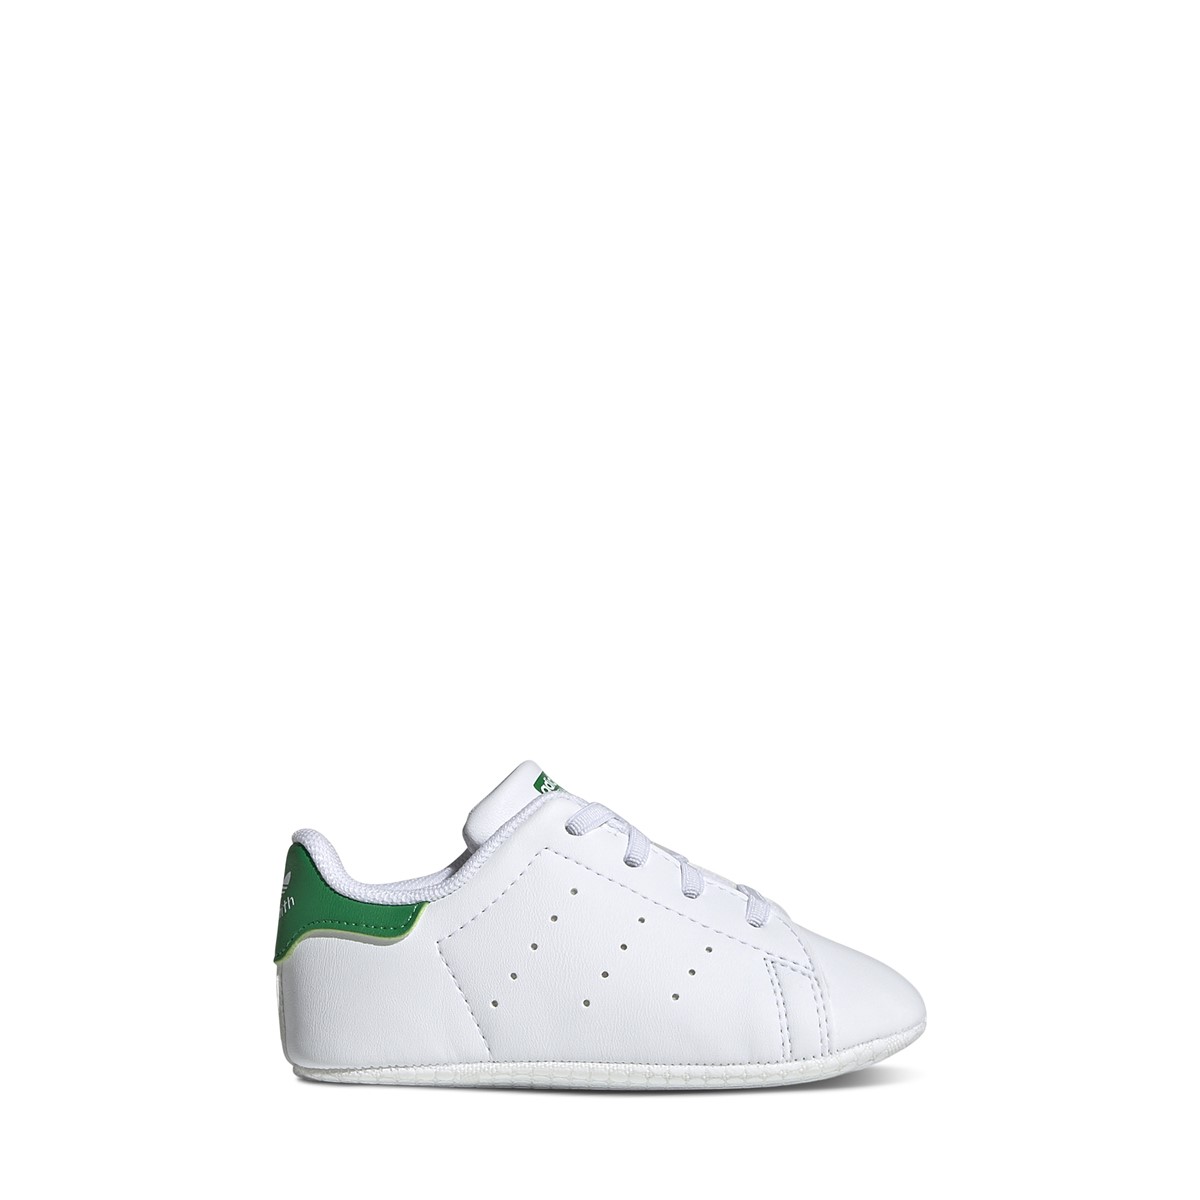 Baby Stan Smith Crib Sneakers in White/Green